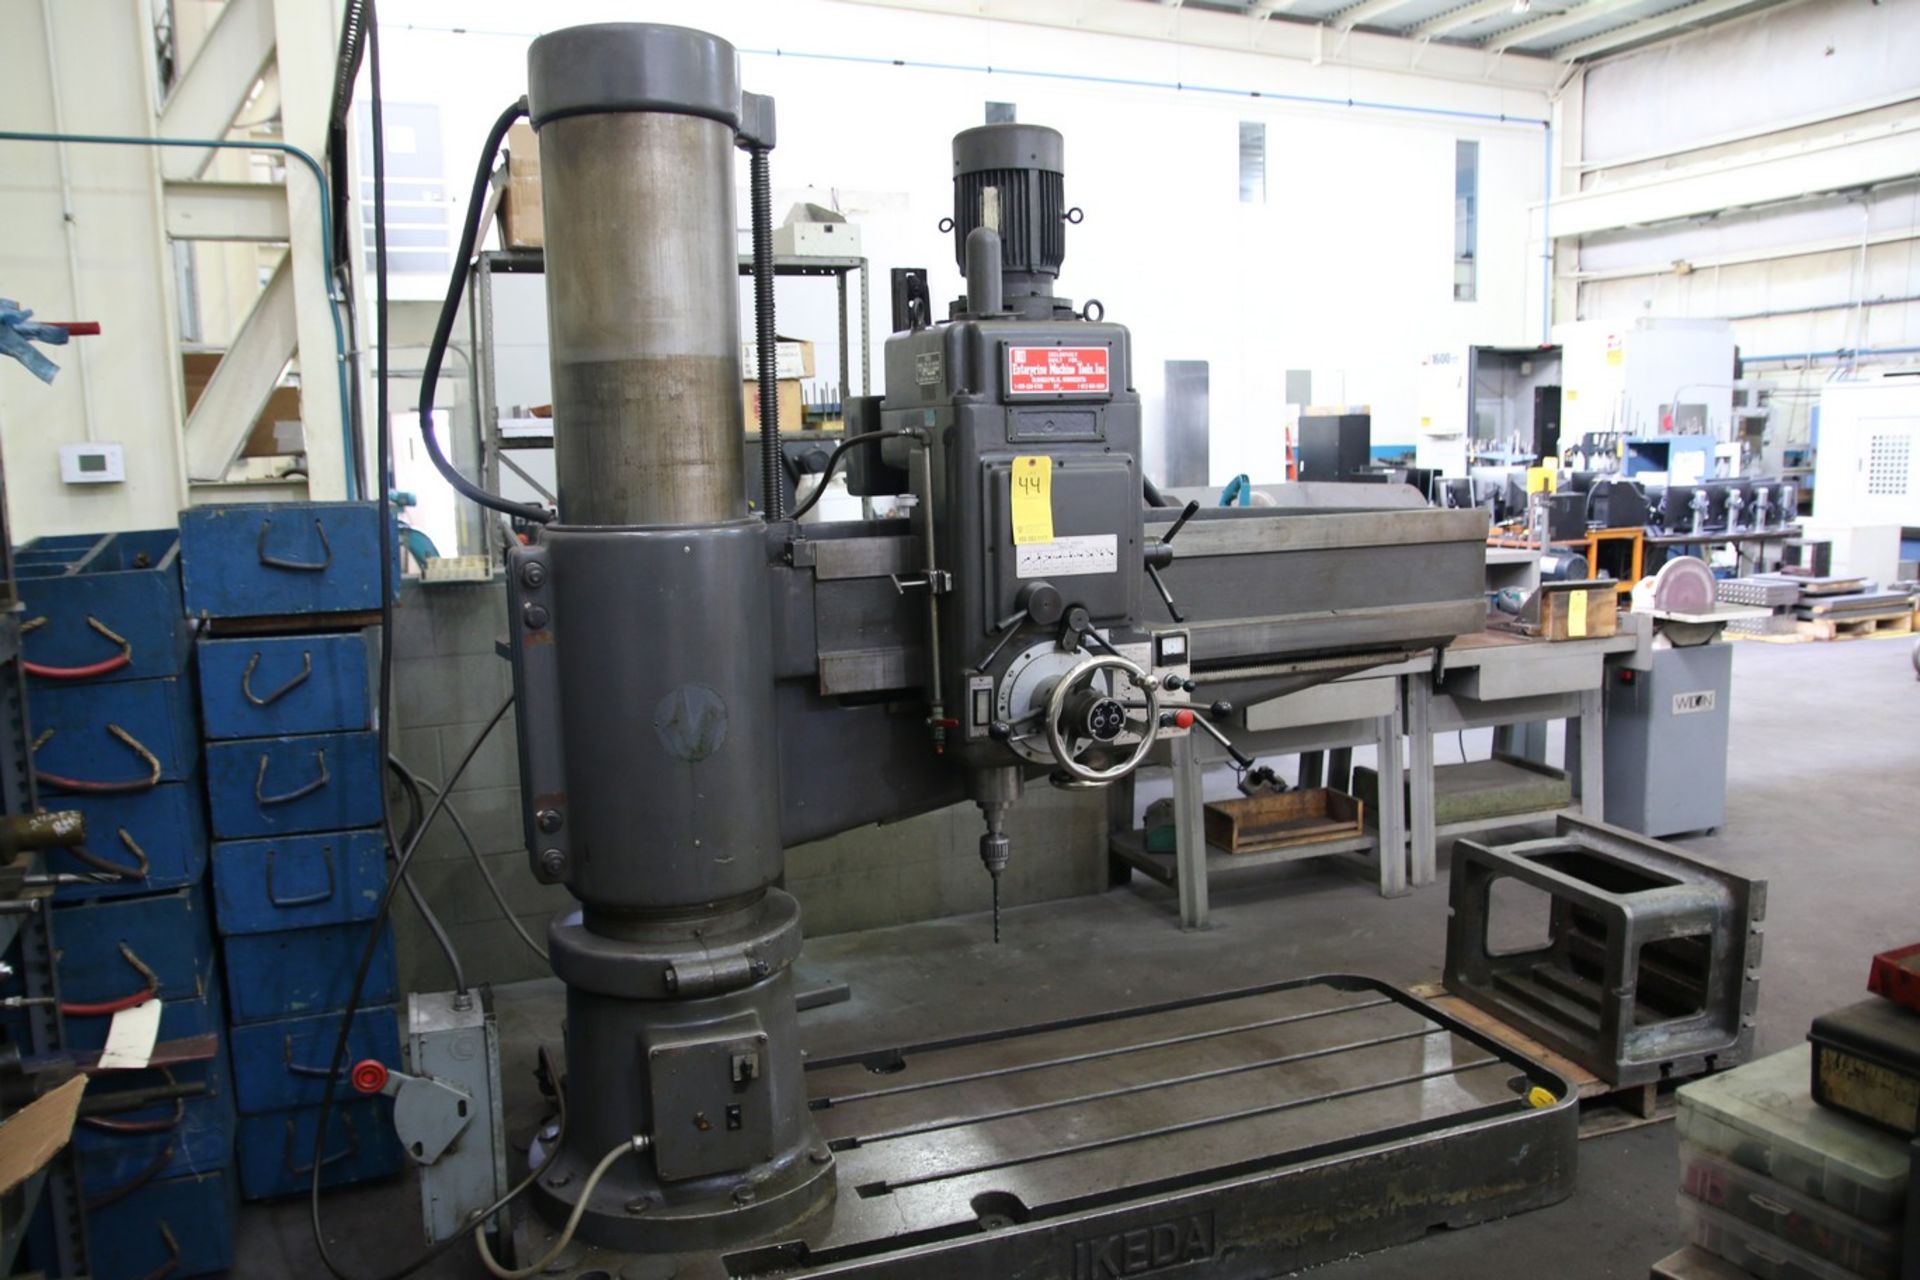 Ikeda RM-1575 Ikeda RM-1575 Radial Drilling Machine Includes T-Slot Box Table